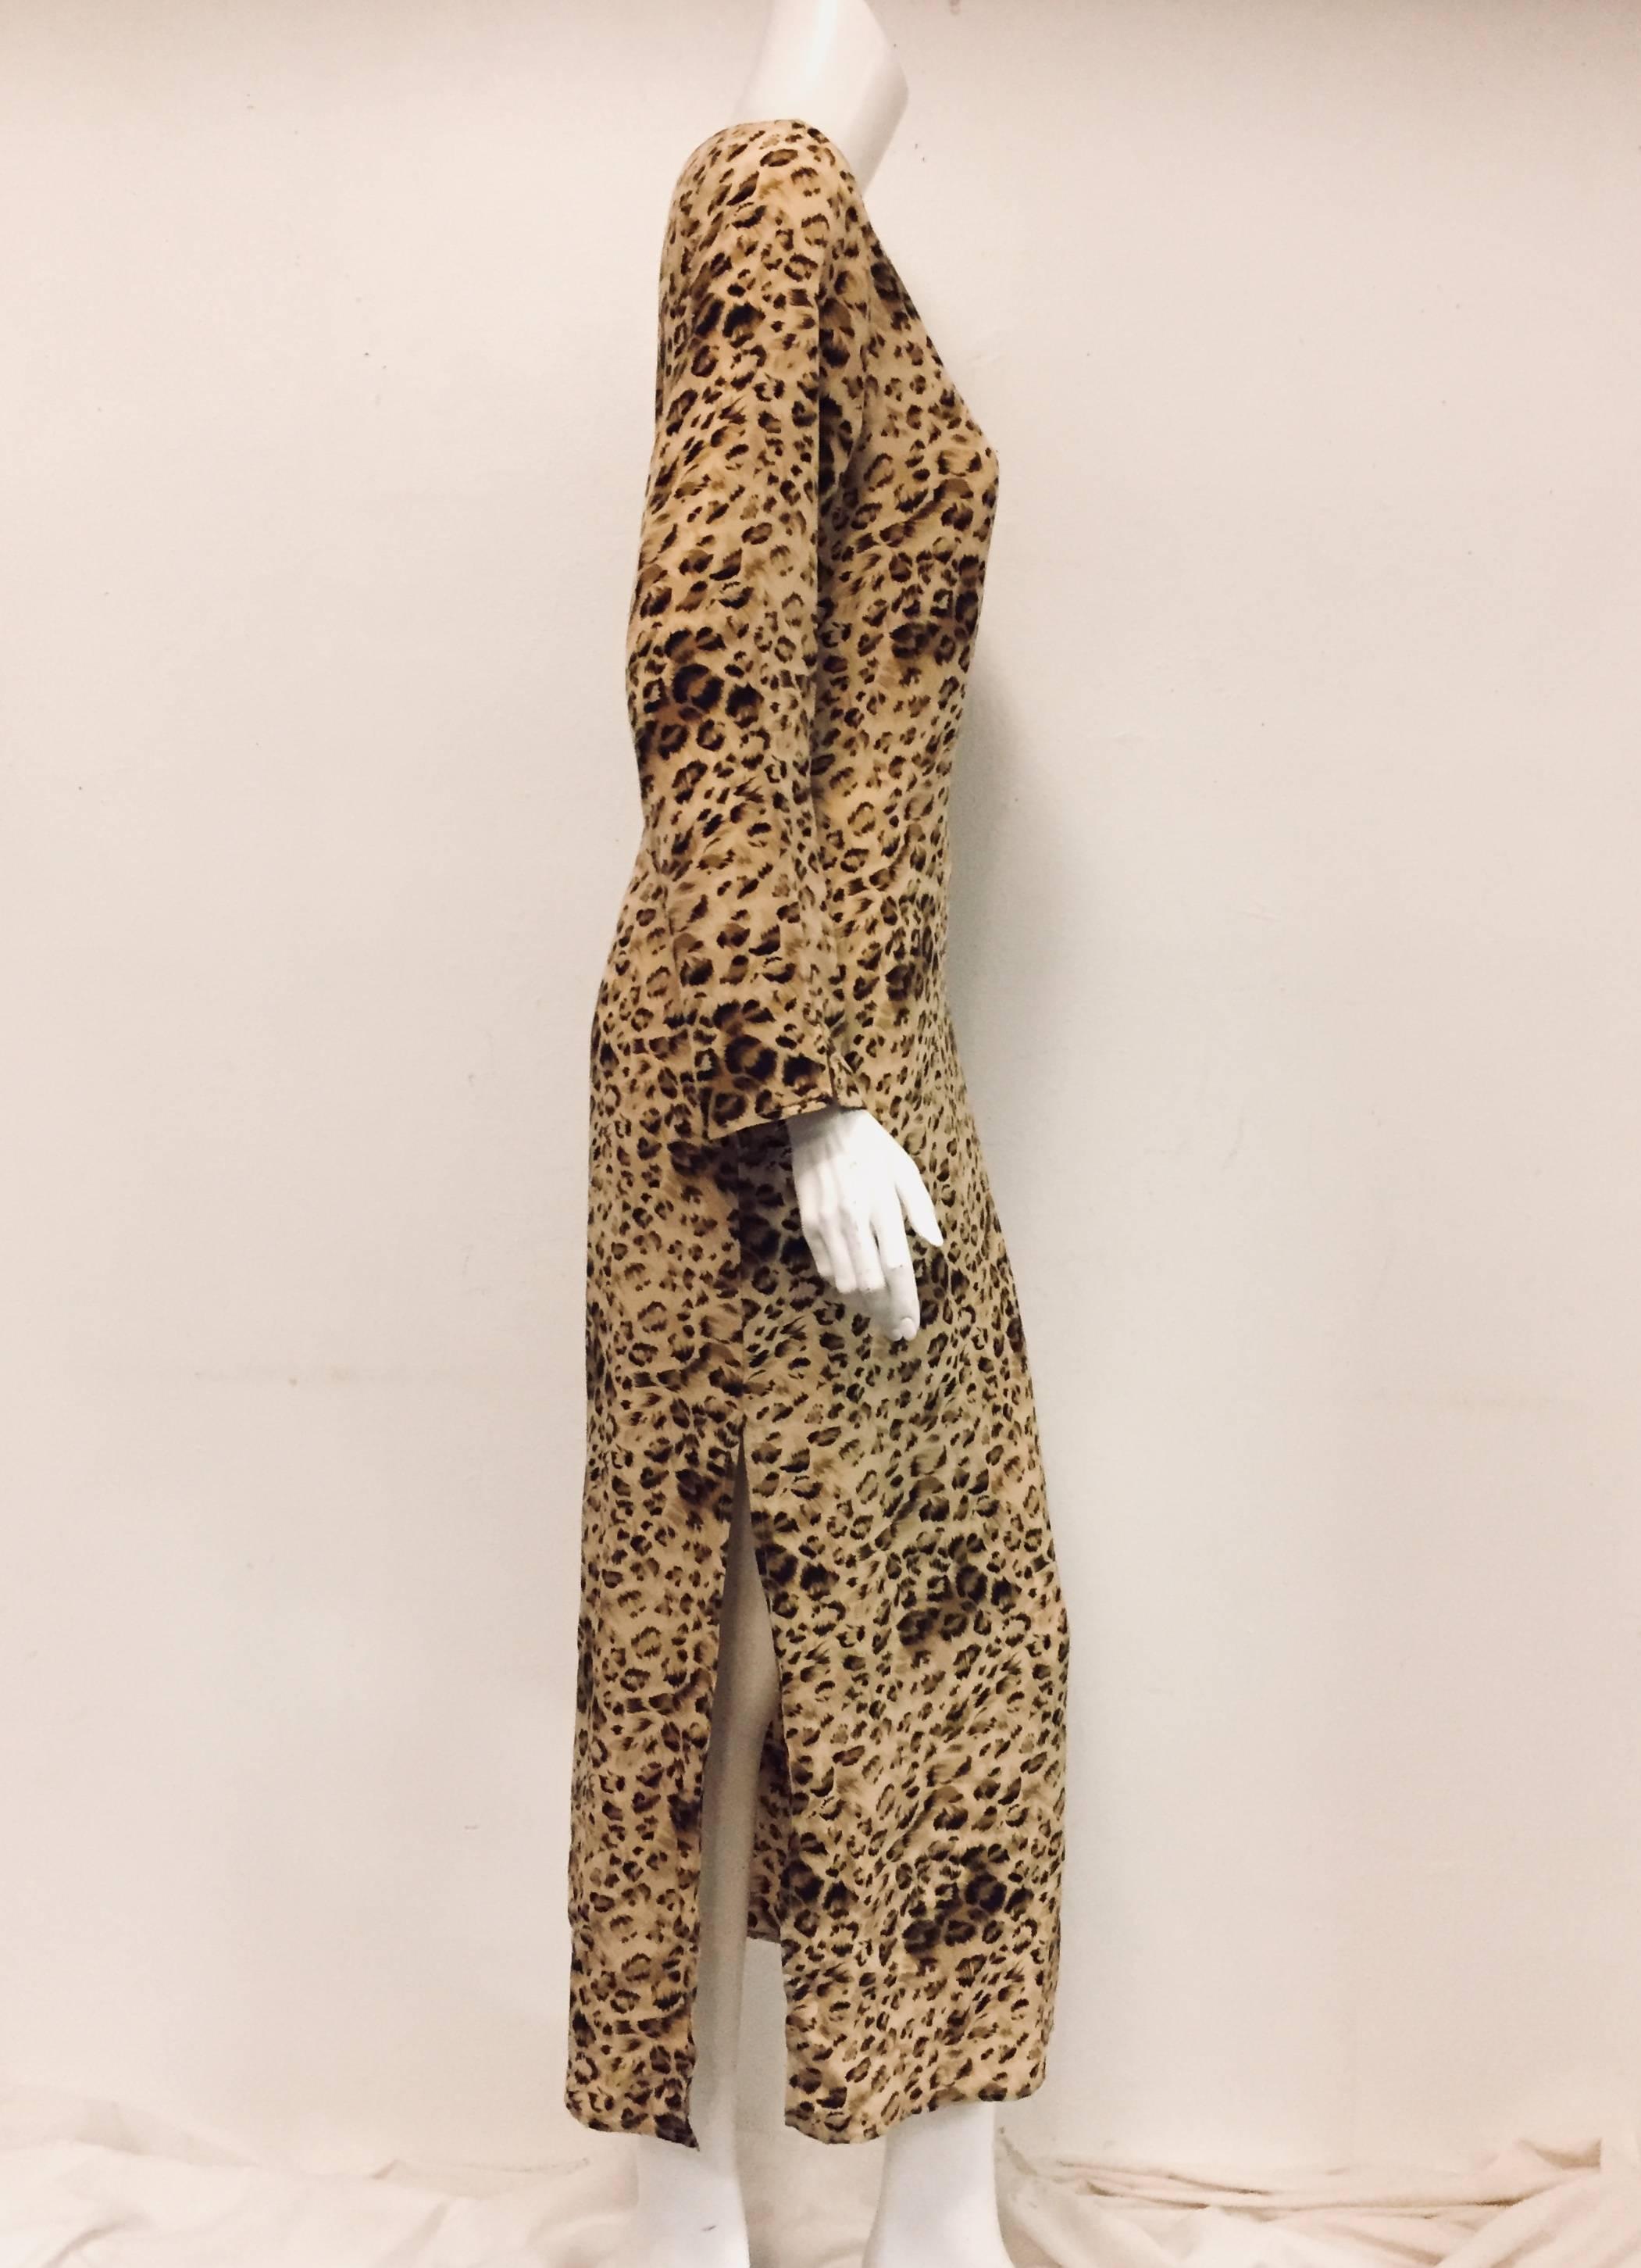 This Neiman Marcus caftan in beige and brown silk leopard print is loose fitting and sexy at the same time.  The soft silk kaftan with slits on the side and long sleeves can bring out the leopard in you.  The bateau neckline is comfortable yet